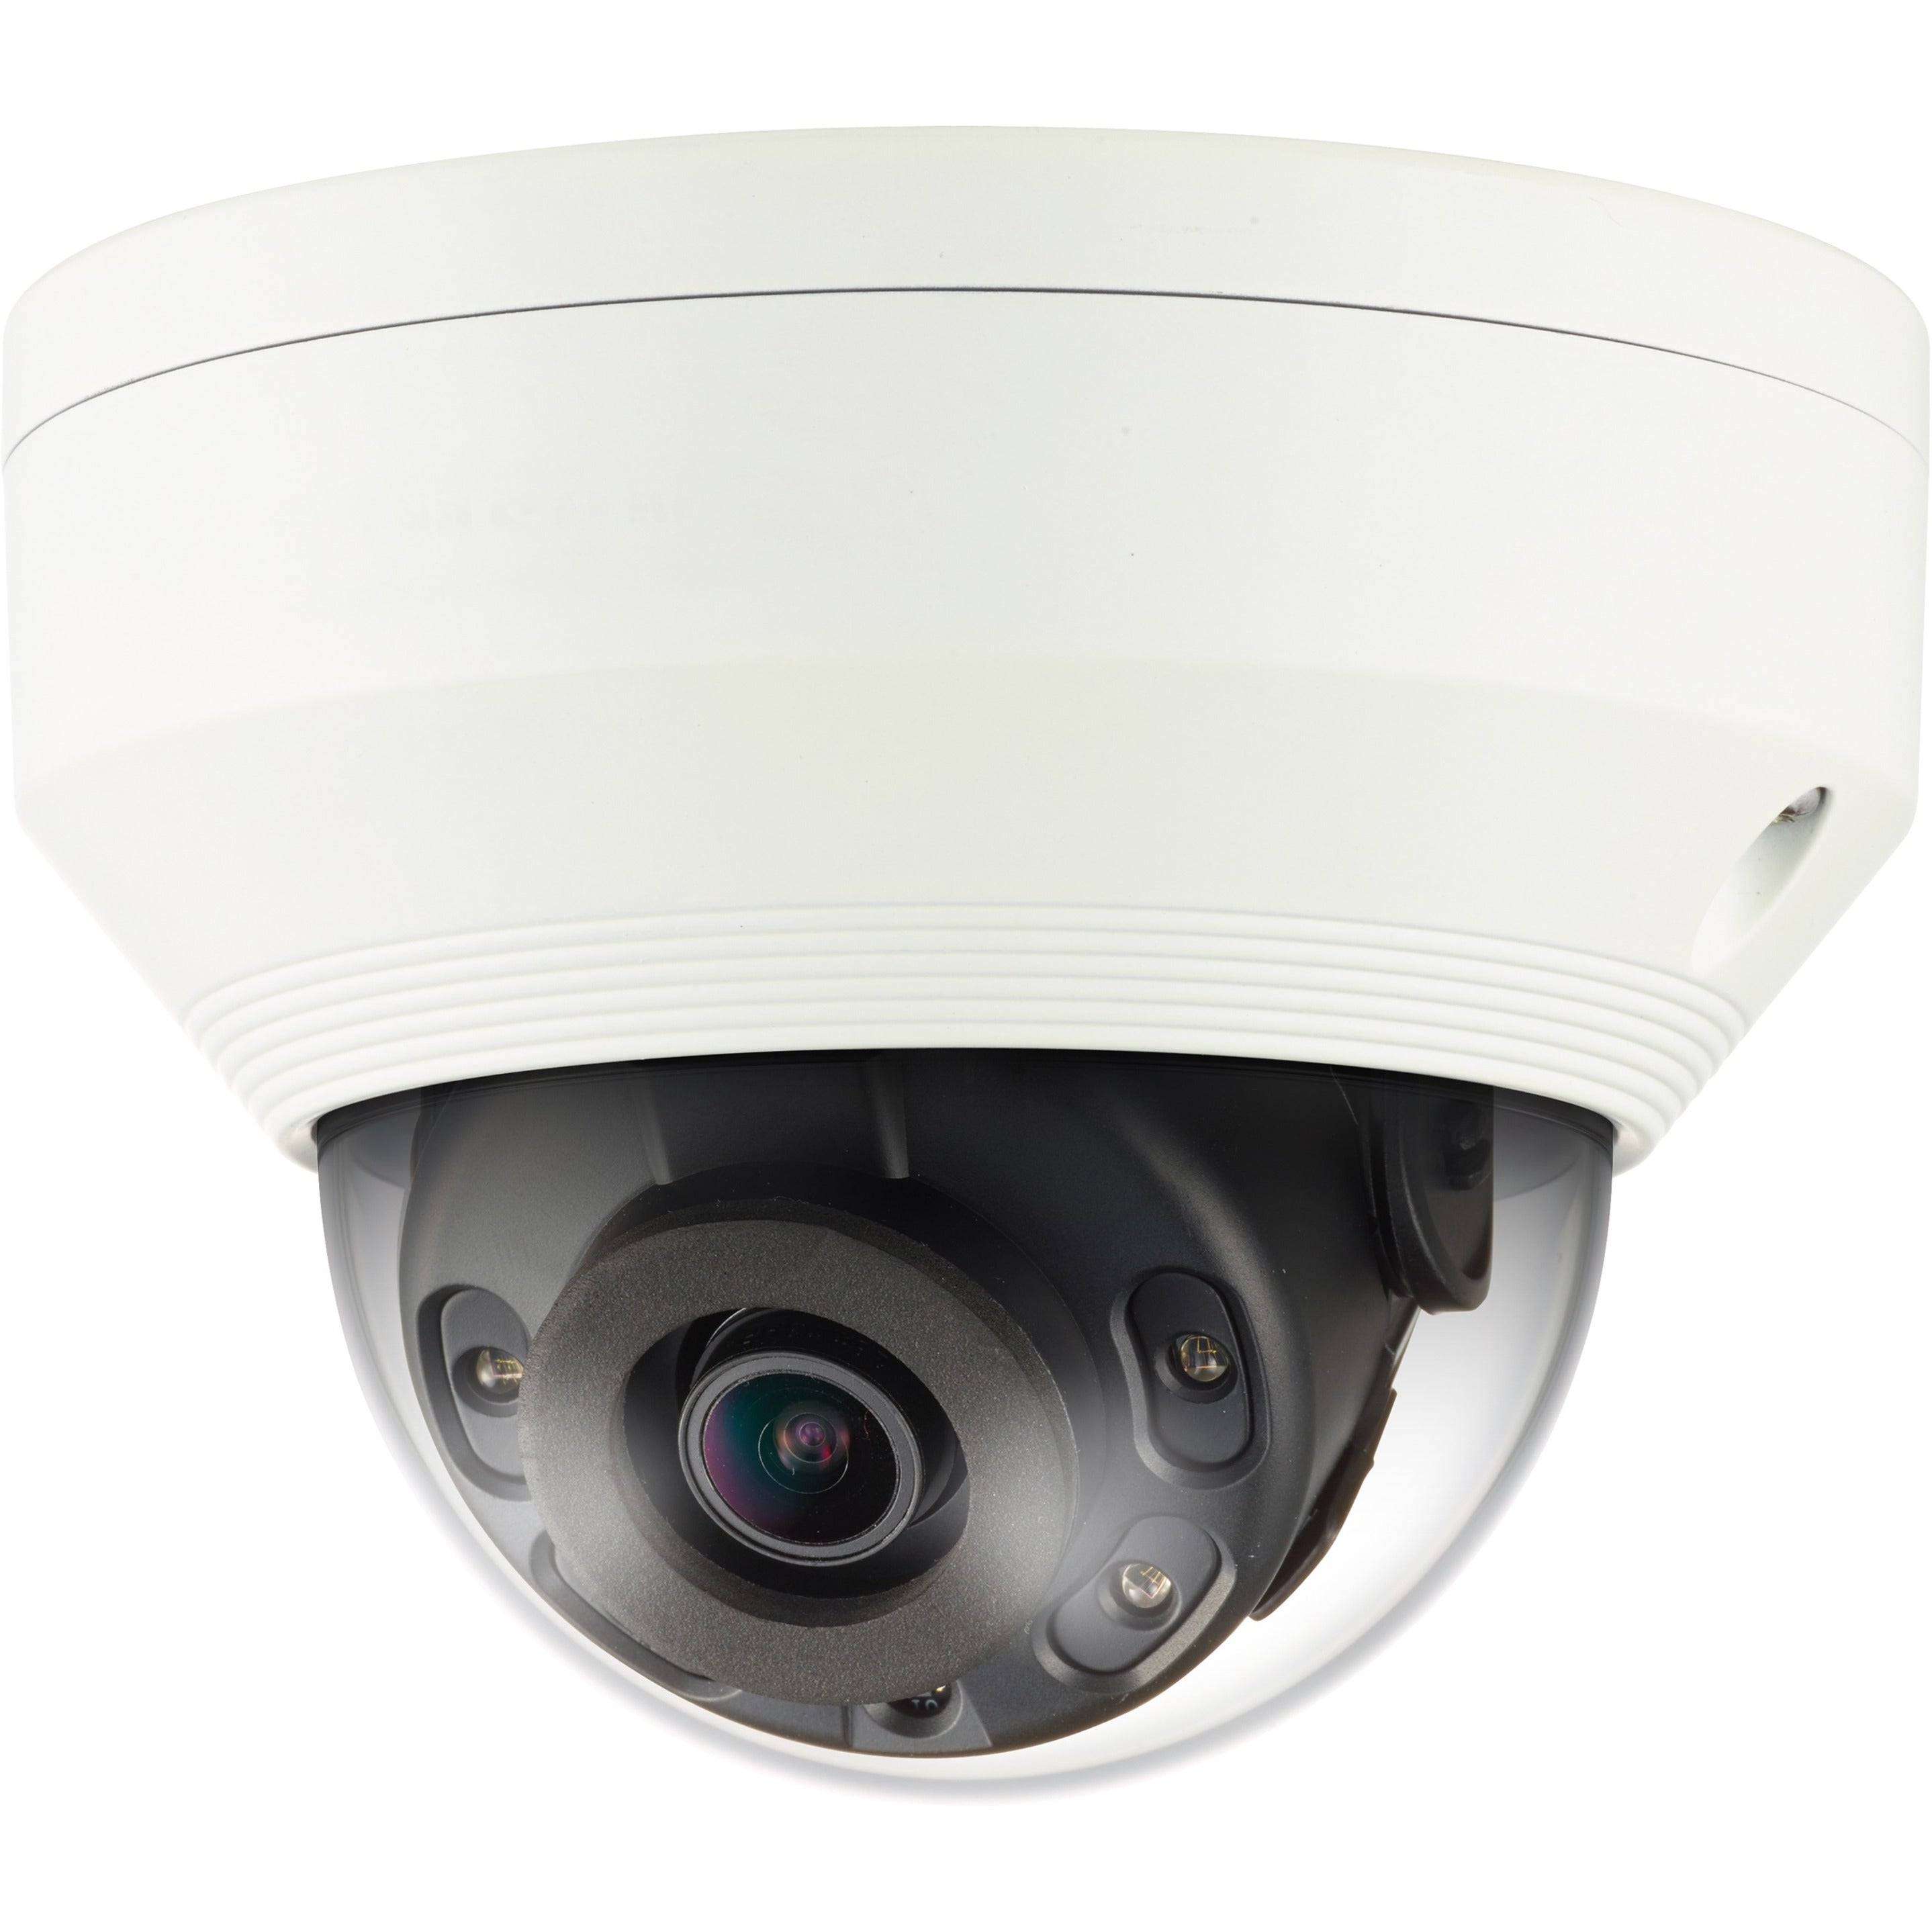 Wisenet QNV-6012R 2MP Network IR Dome Camera, Full HD, SD Card Local Storage, Day/Night, Wide Dynamic Range, IK10 Impact Protection, IP66 Ingress Protection